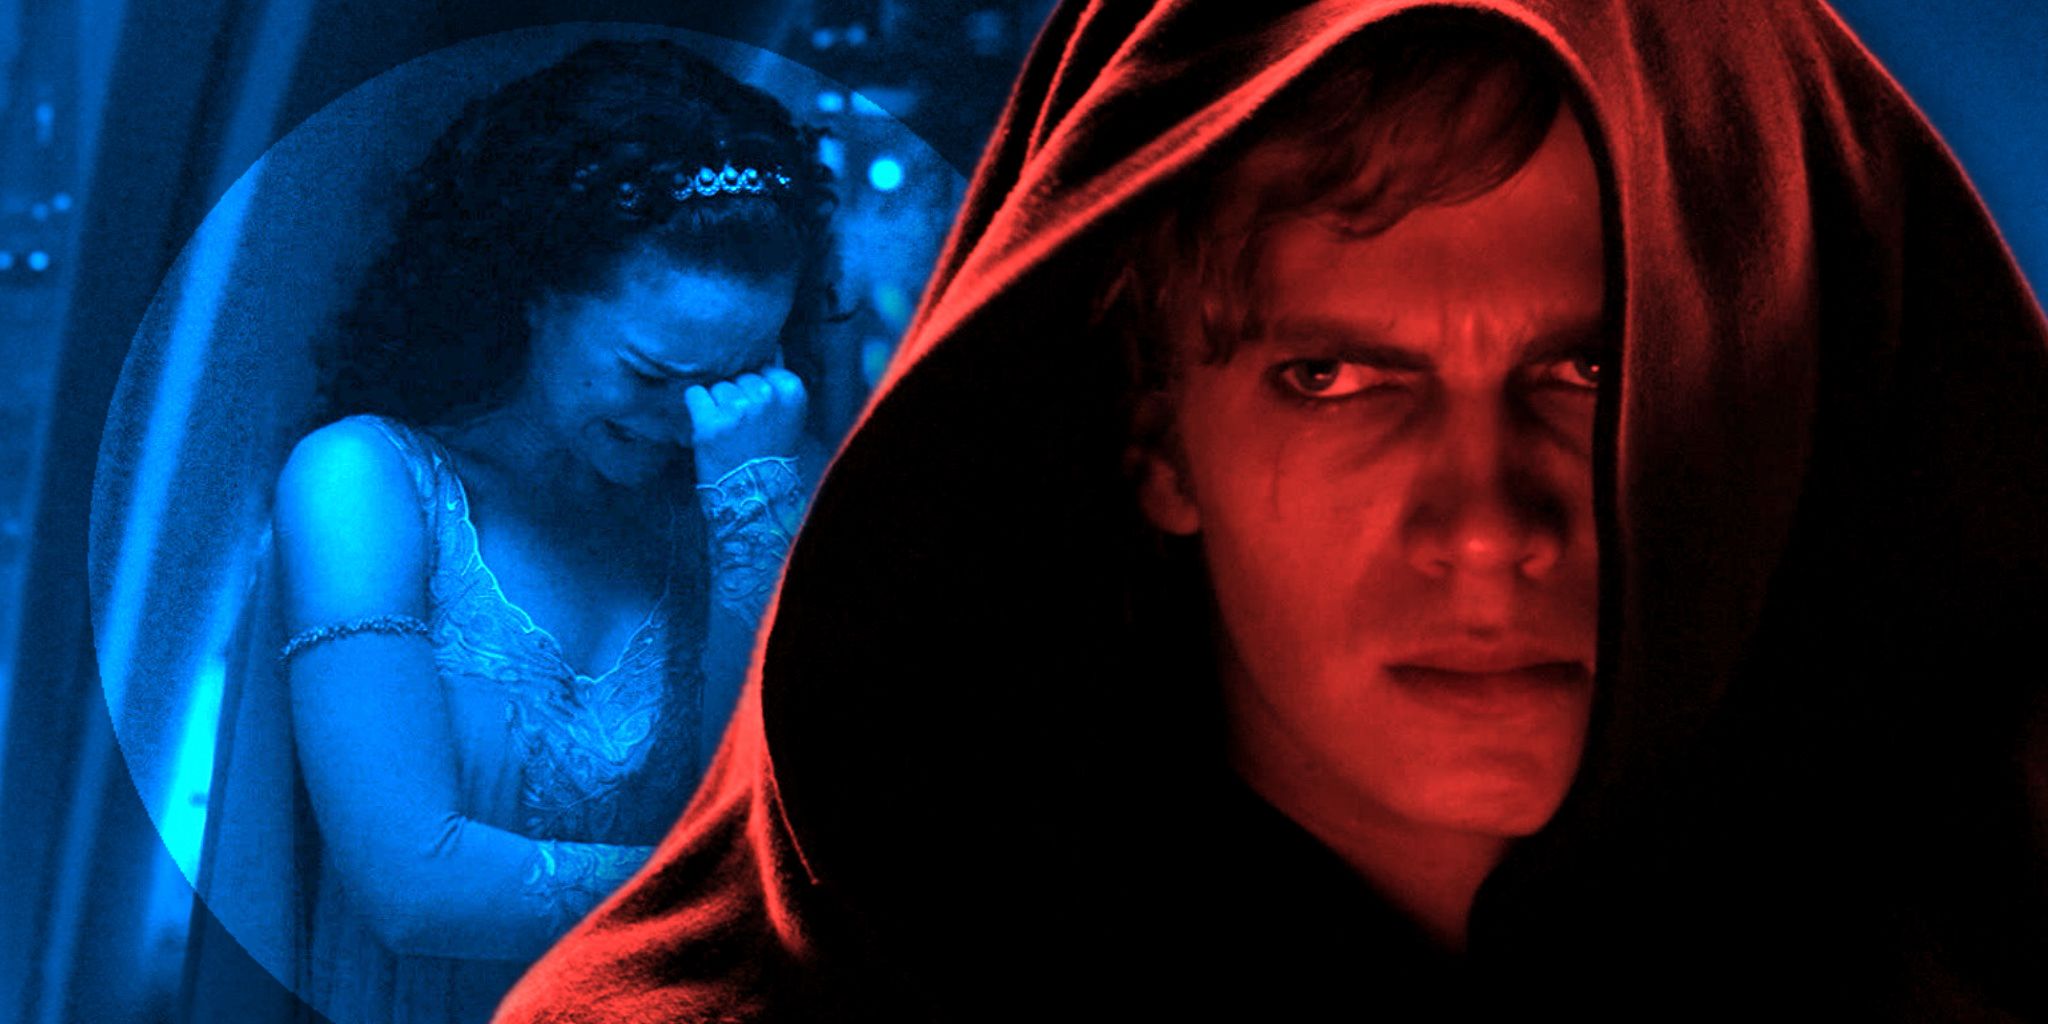 Hayden Christensen as fallen Anakin Skywalker colored red superimposed over Natalie Portman's Padme Amidala crying at the window